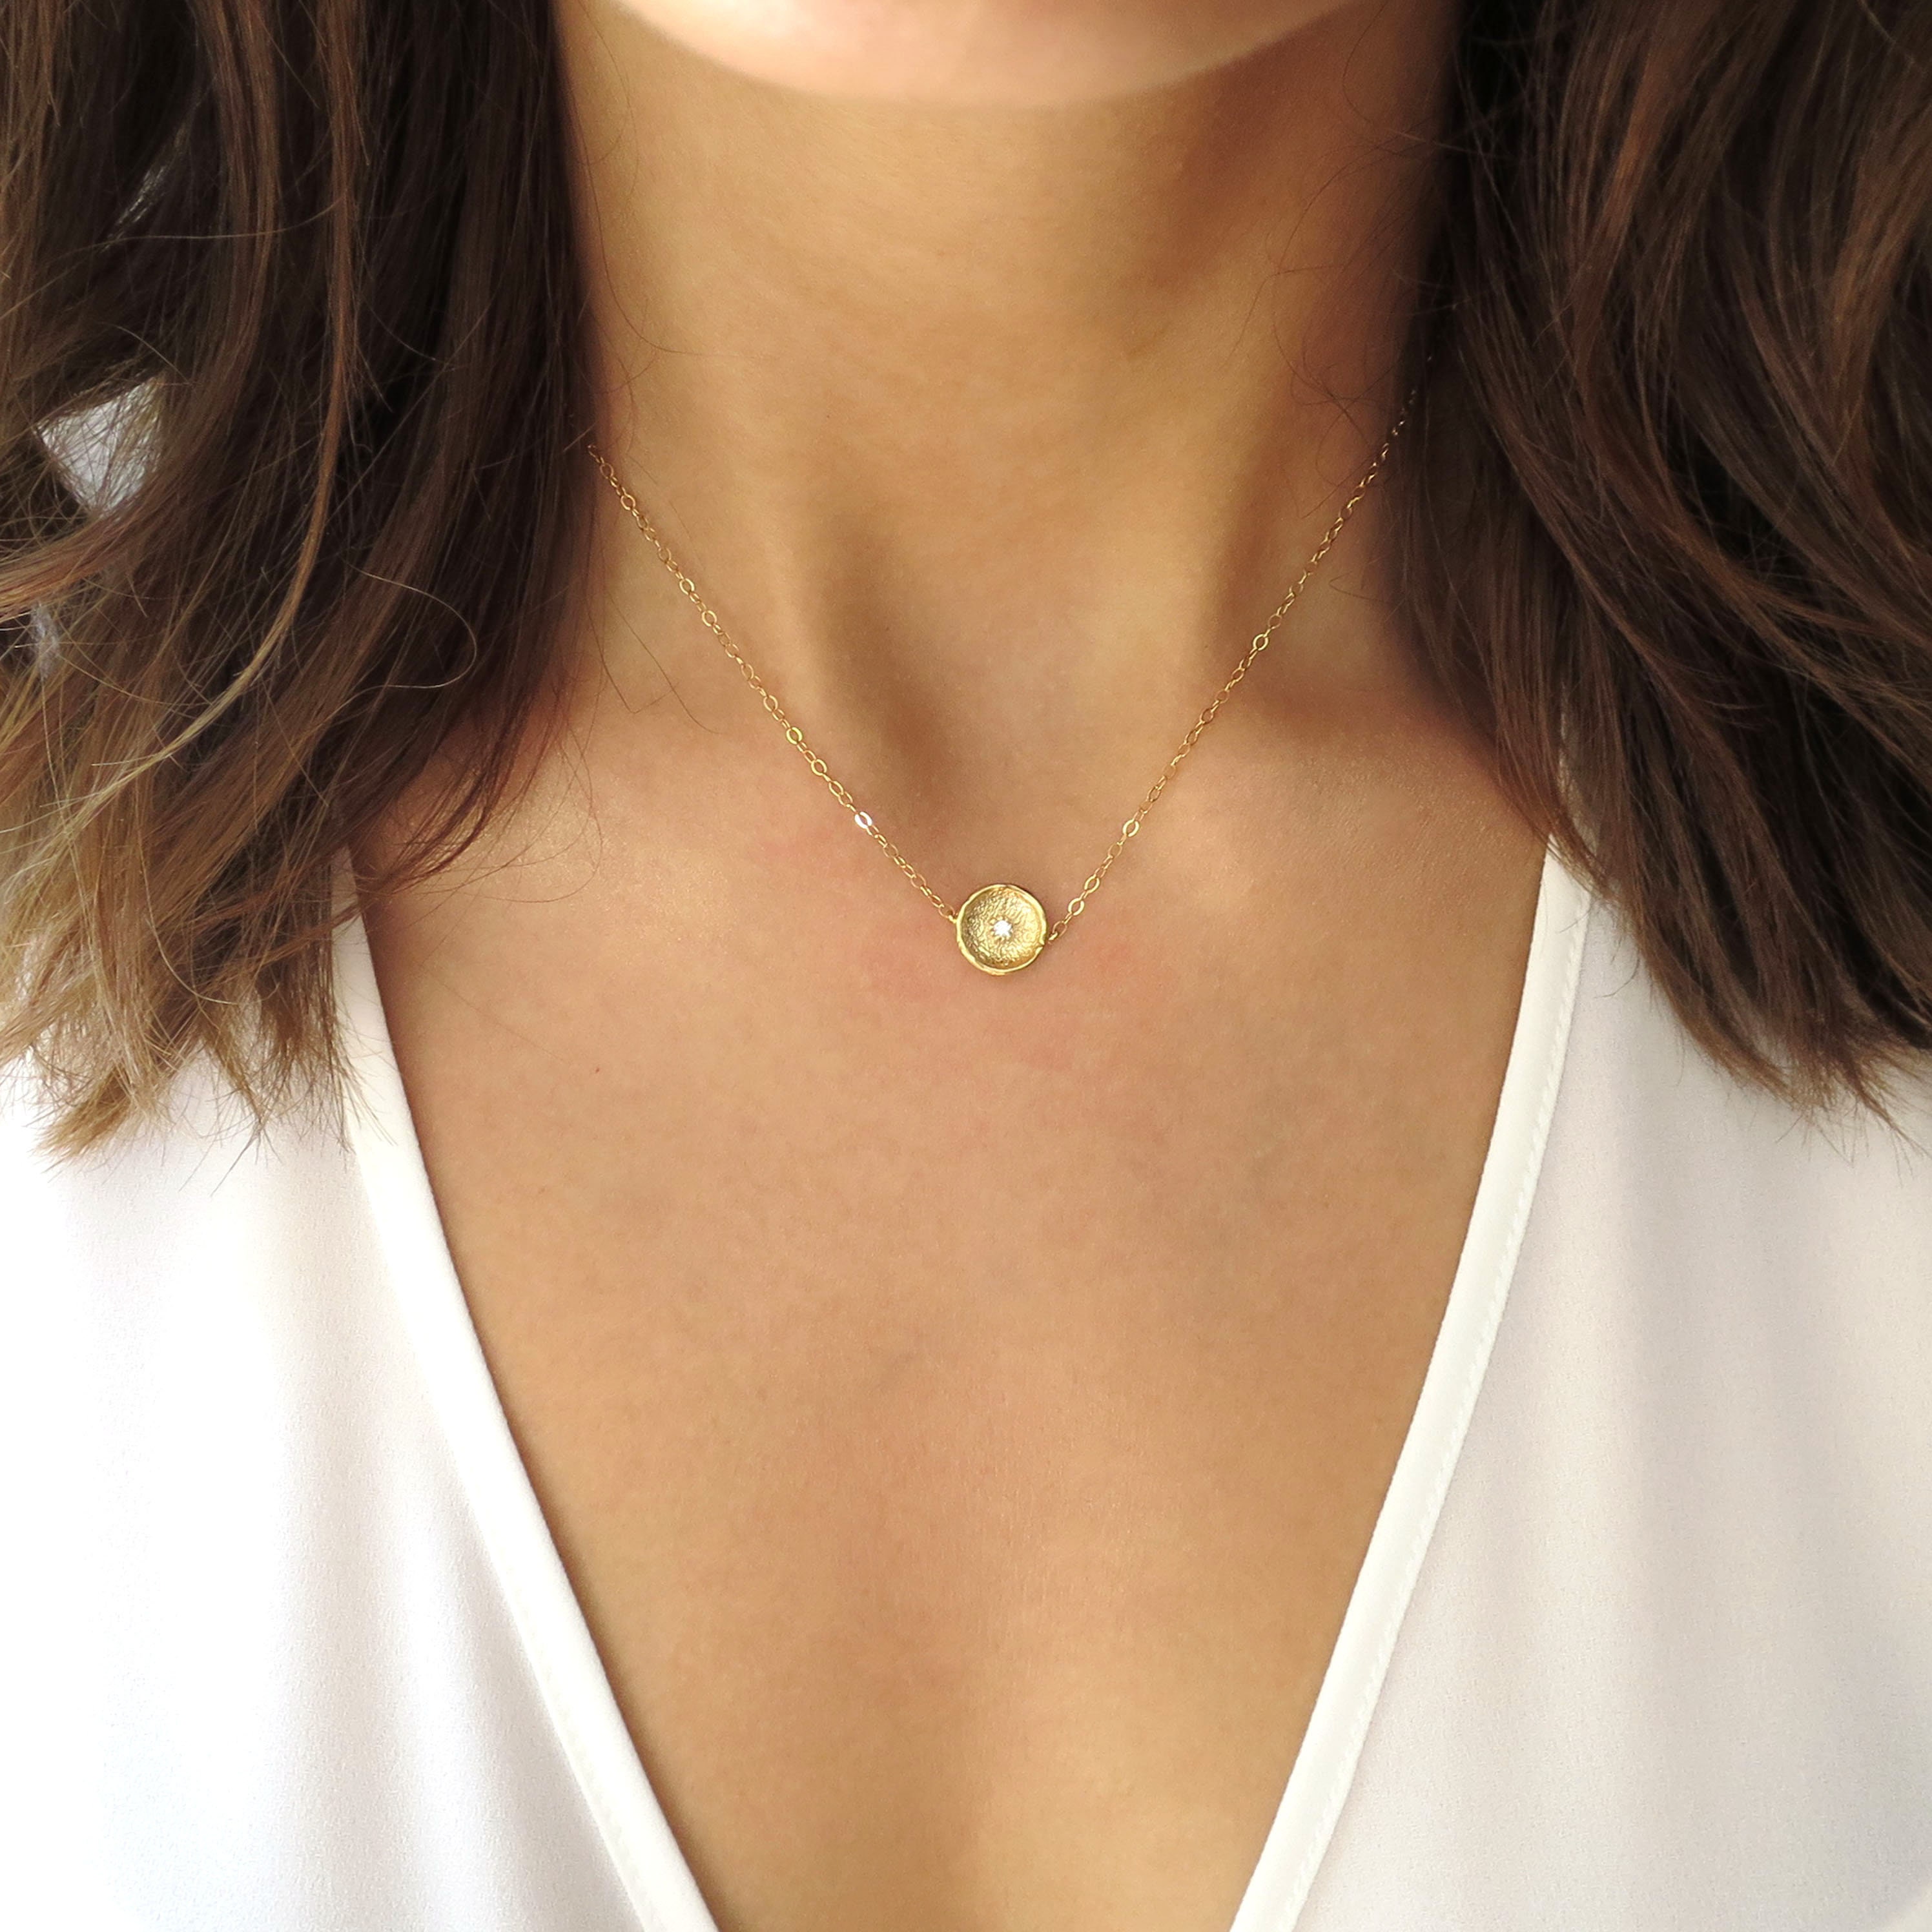 Delicate Gold Choker Necklace - Urban Carats